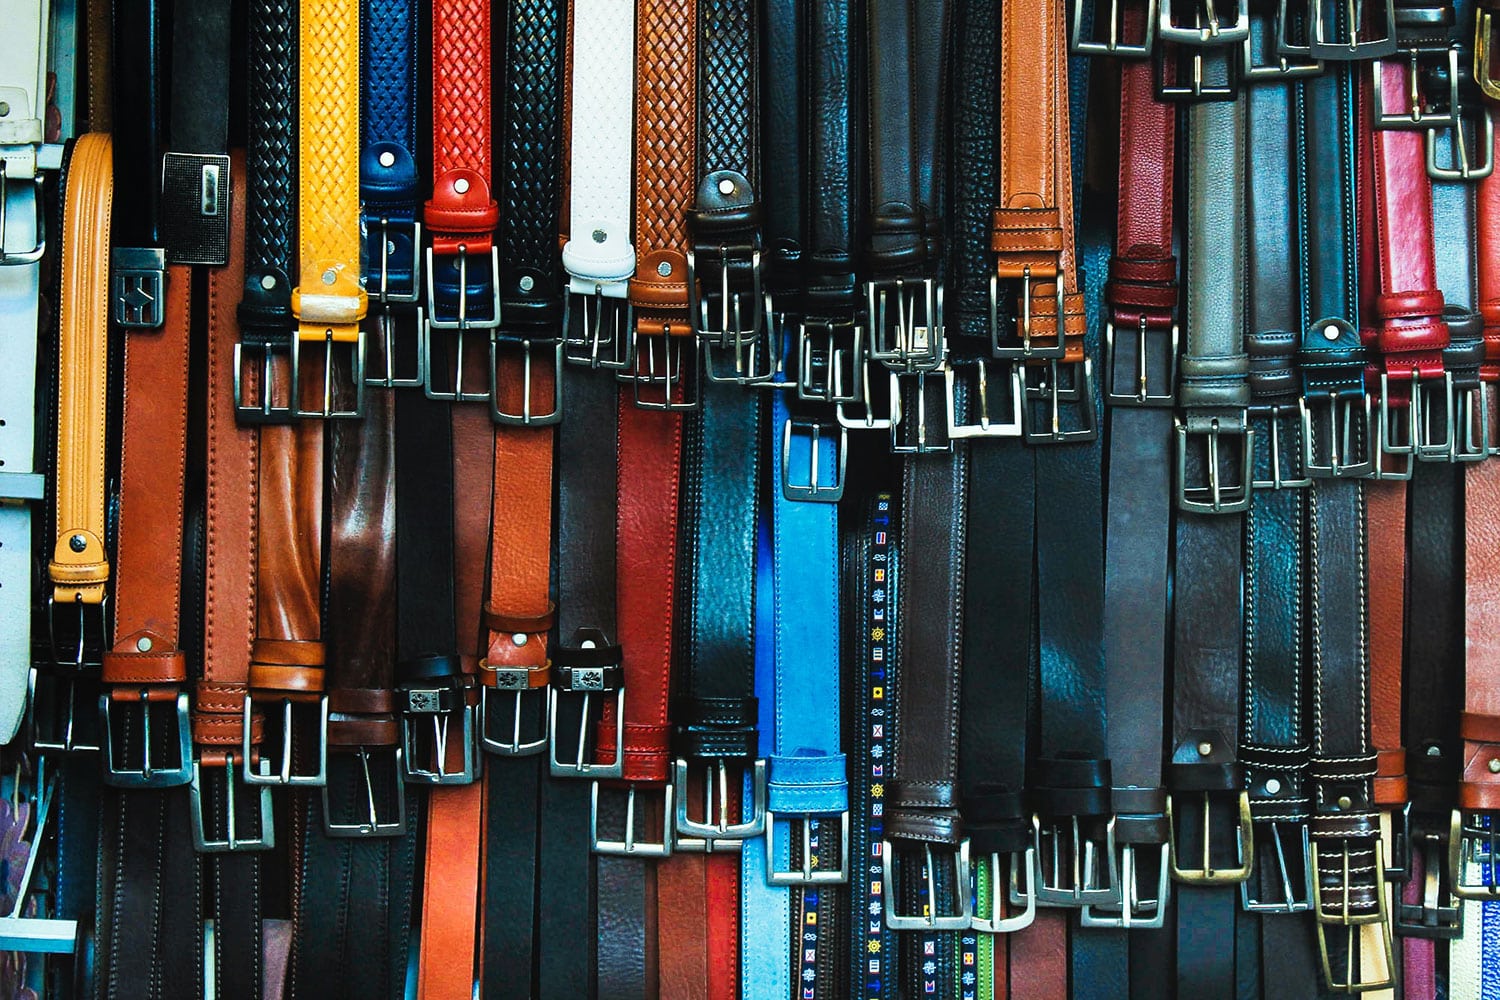 colorful belts display